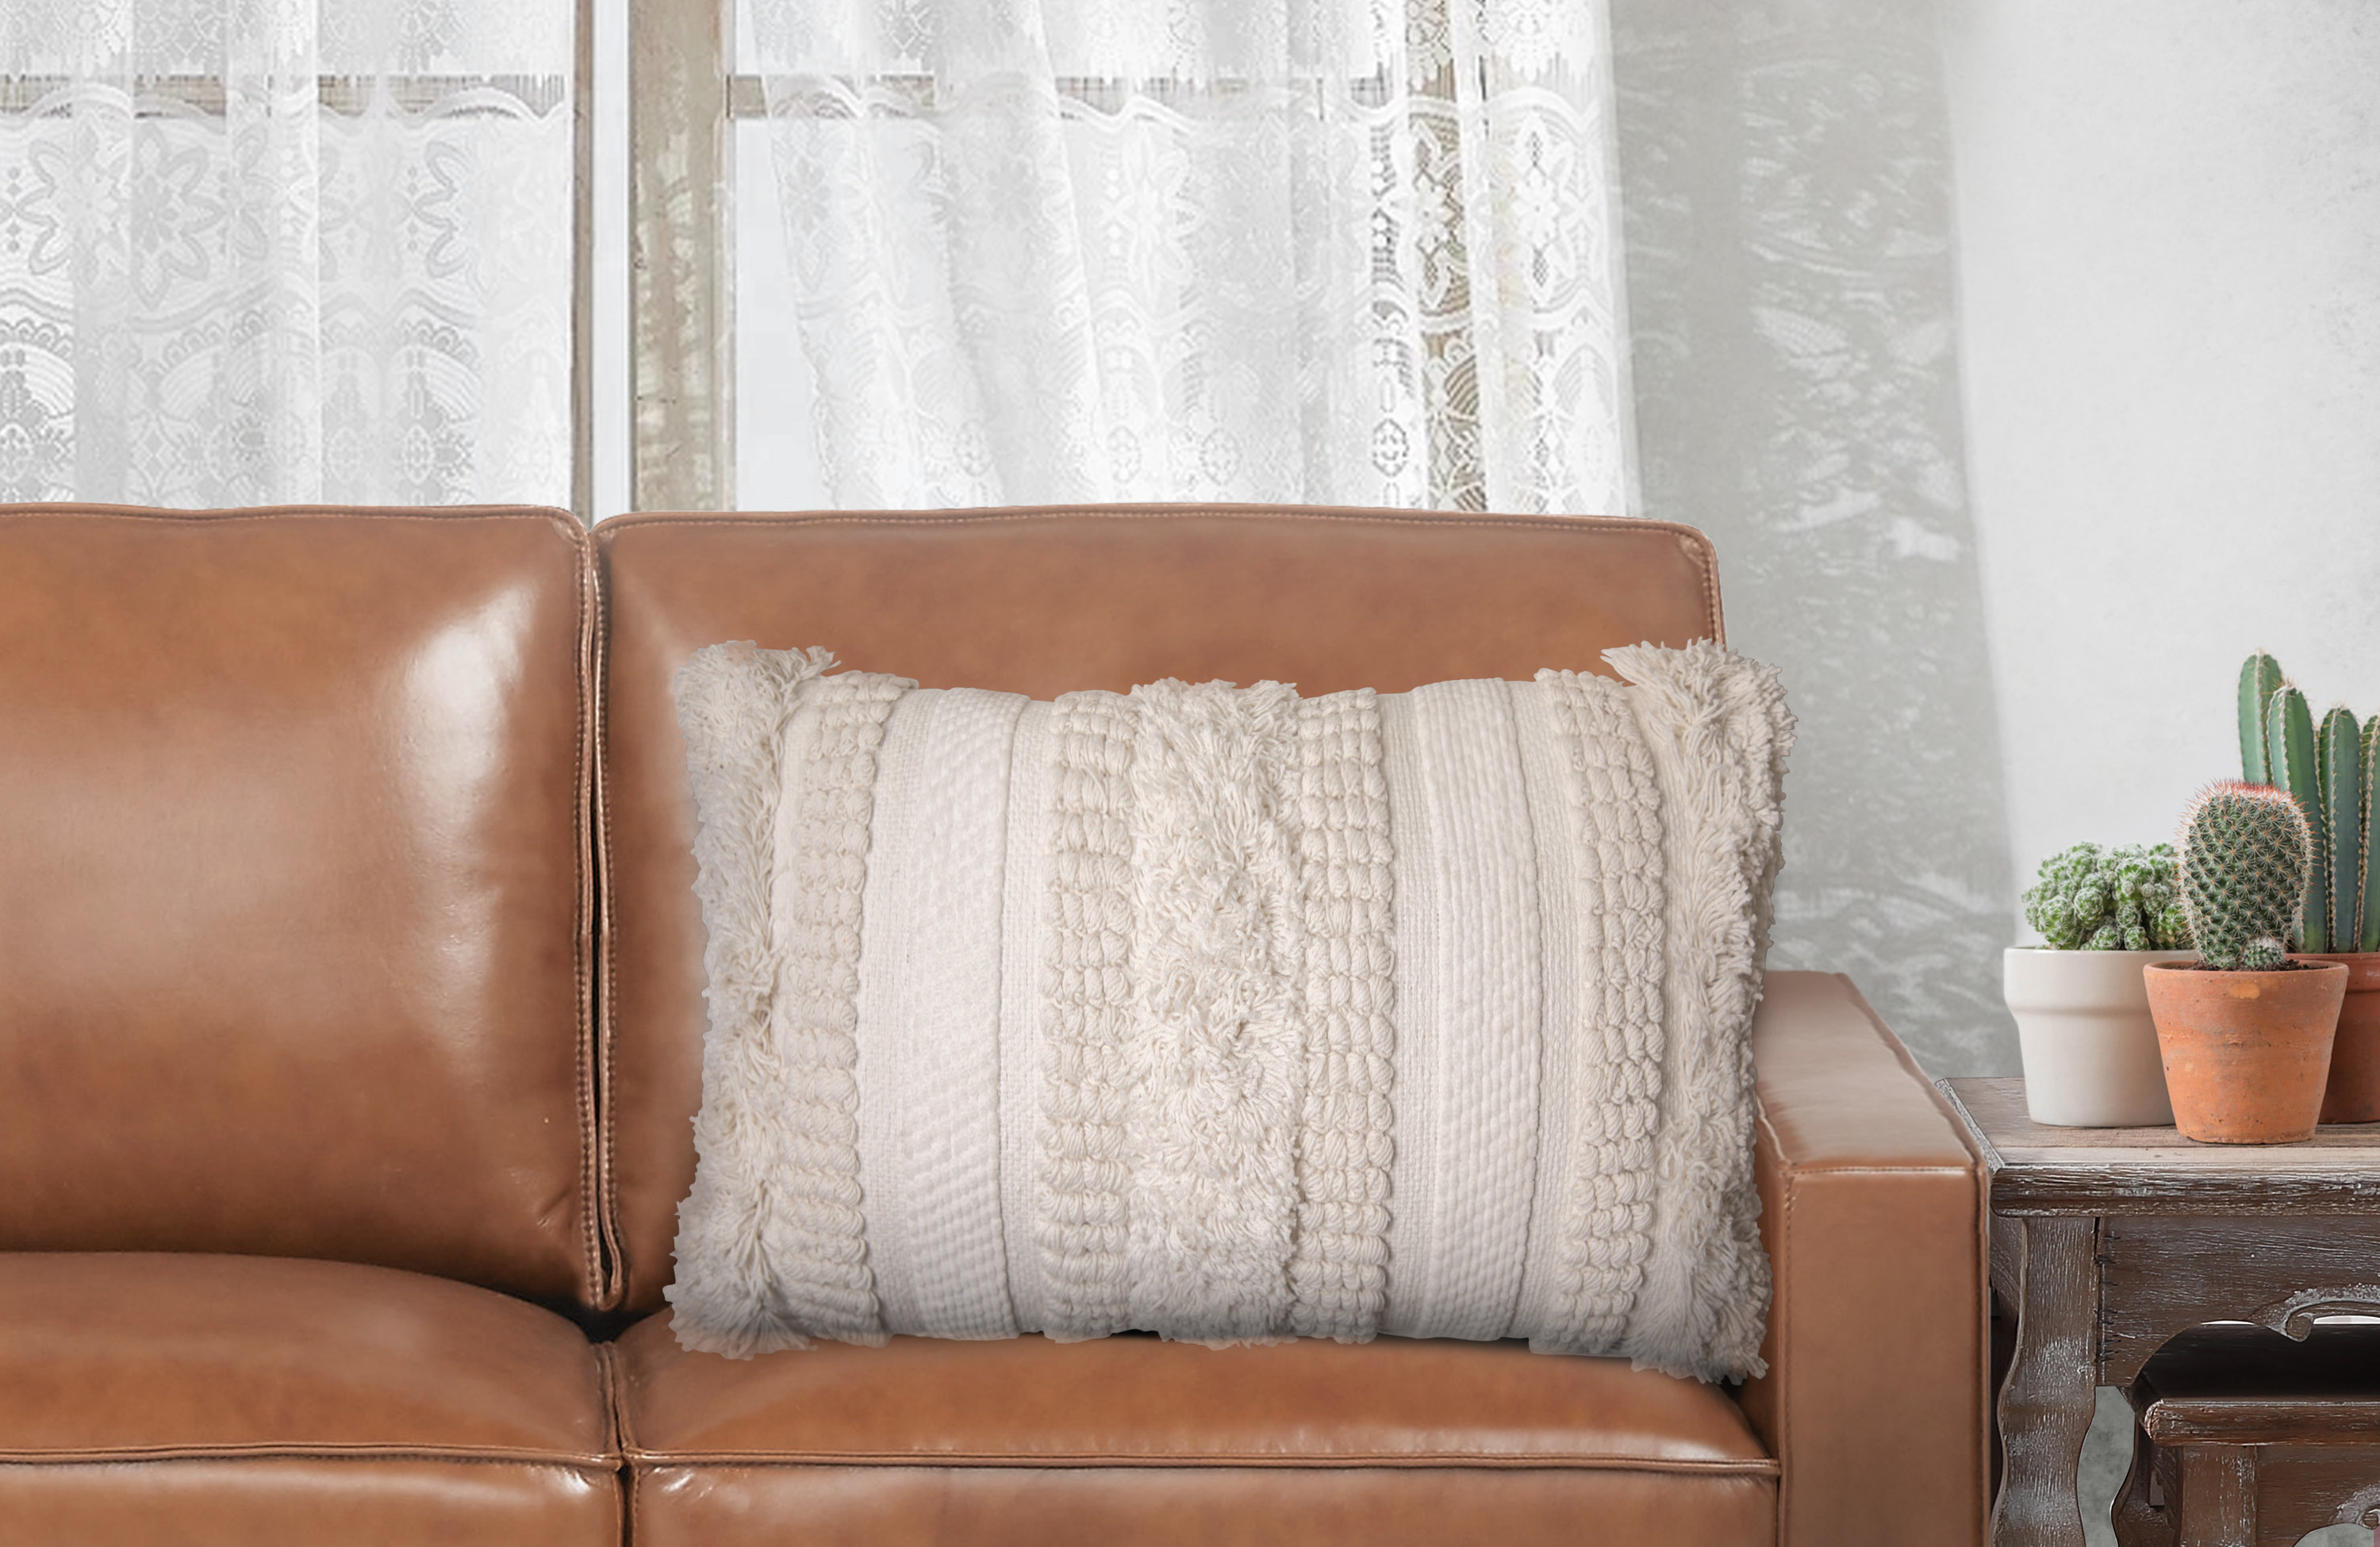 textured throw pillow on a cognac leather couch